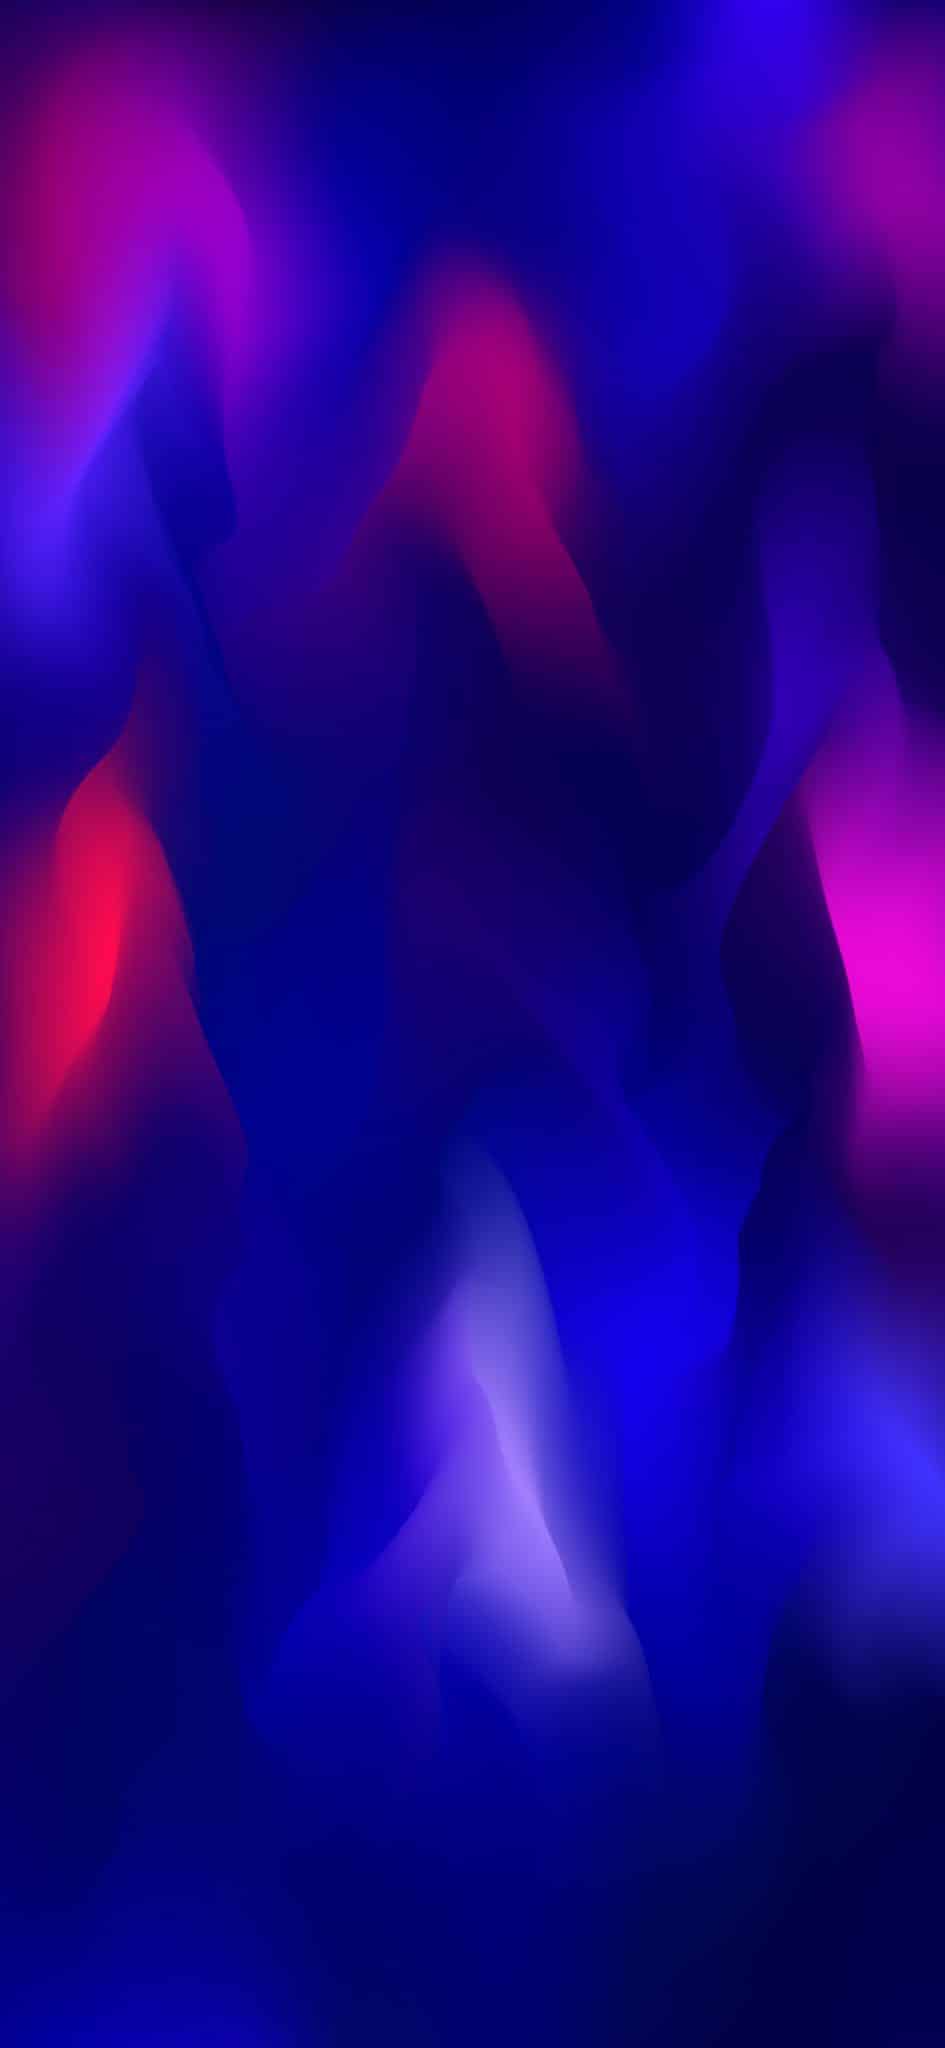 Download Oppo Reno 4 Pro Stock Wallpapers FHD